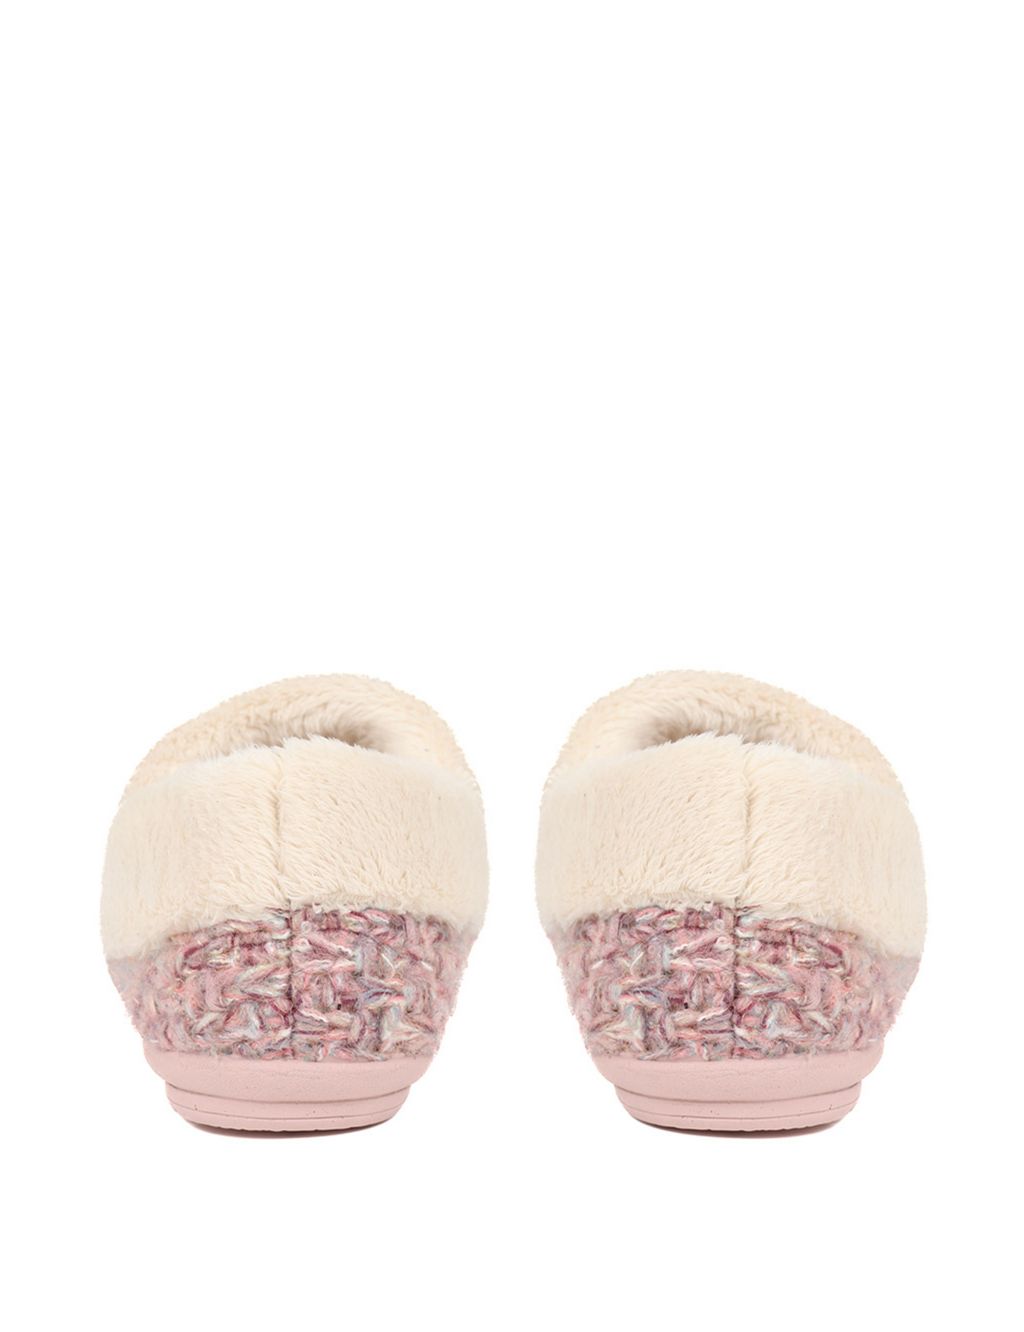 Faux Fur Lined Round Toe Slippers image 4